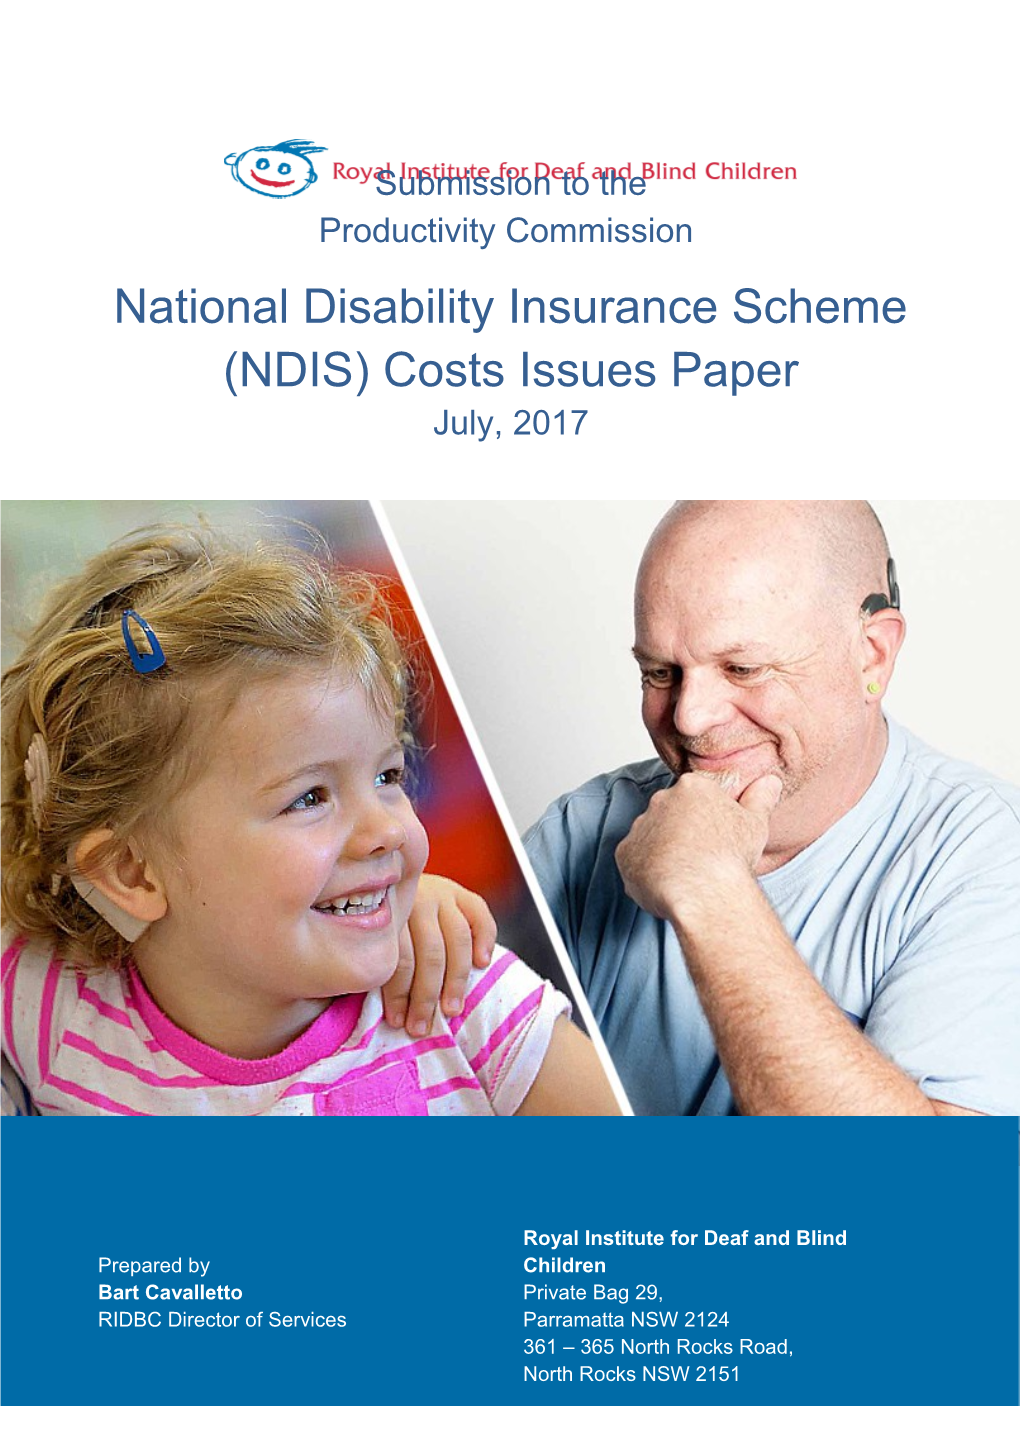 Submission PP259 - Royal Institute for Deaf and Blind Children - National Disability Insurance